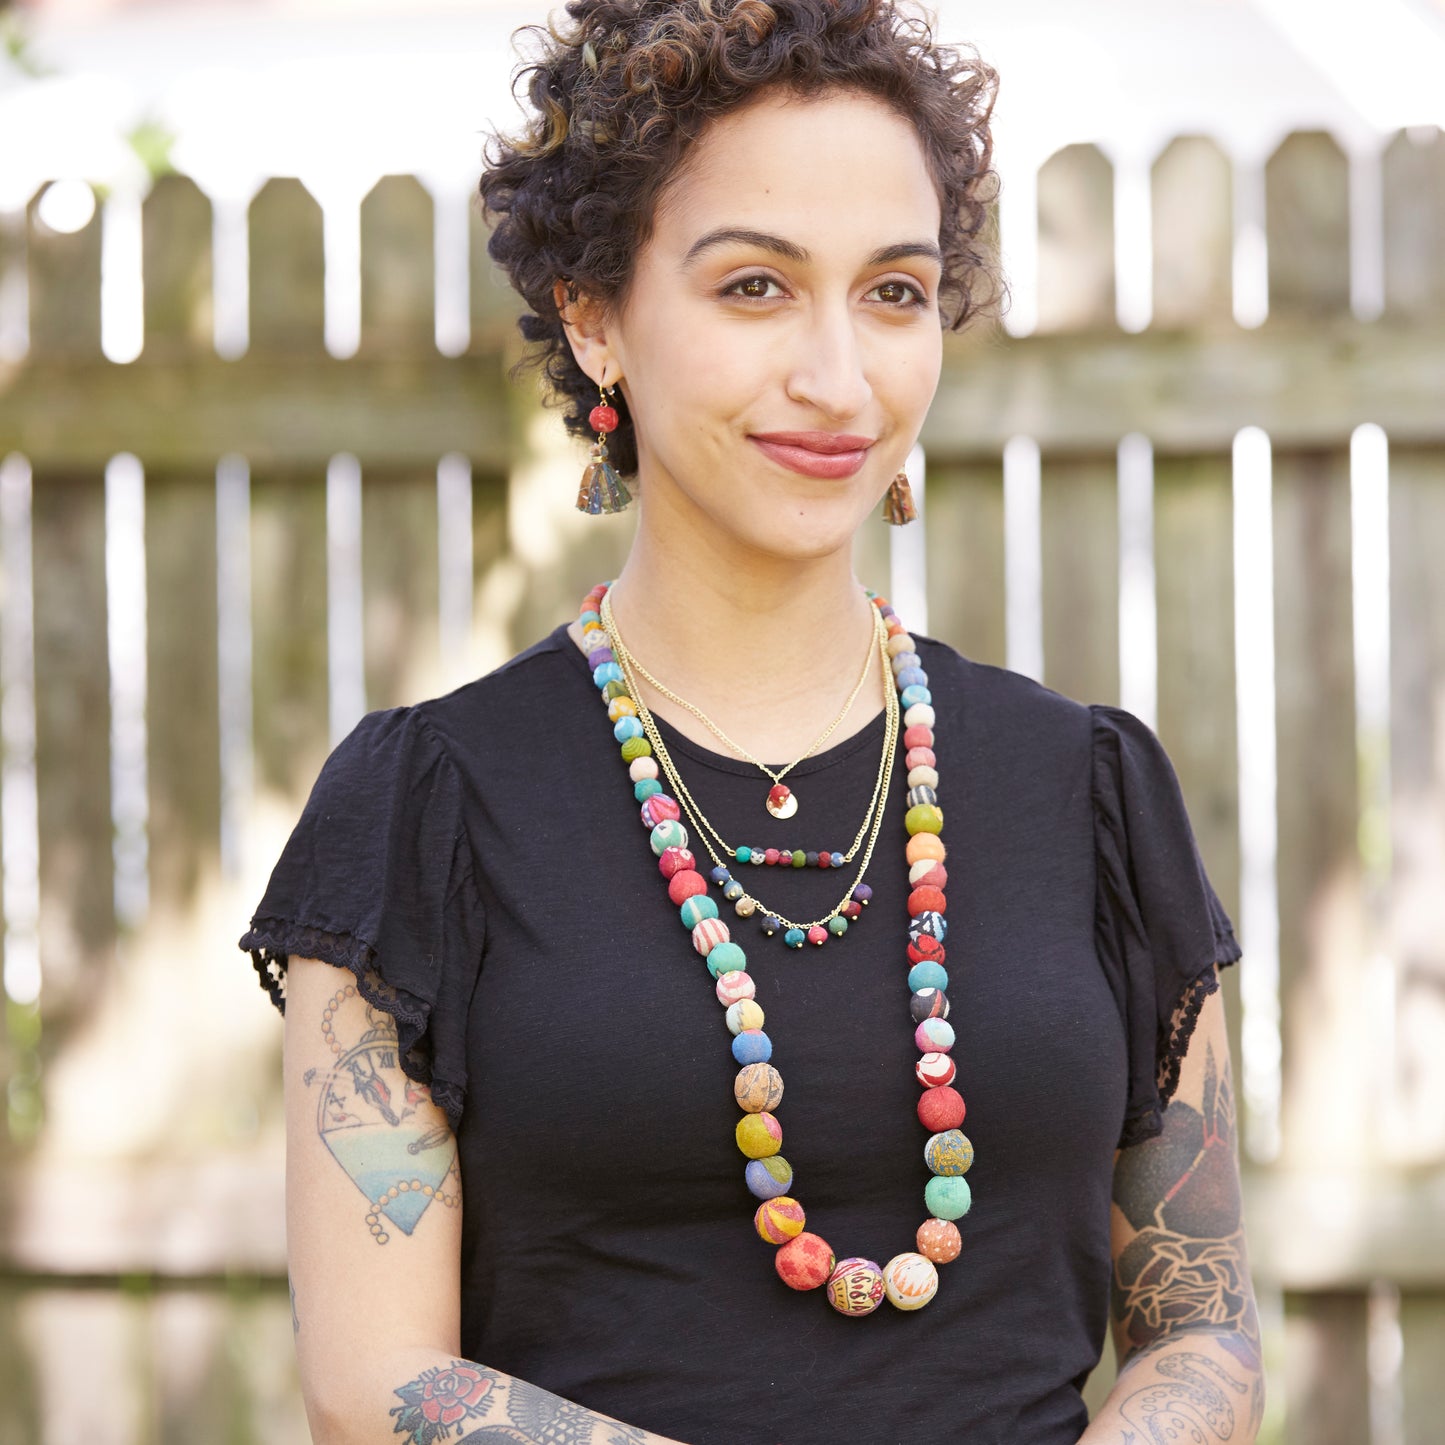 A model wears the Kantha Kali Necklace along with other fair trade kantha jewelry.